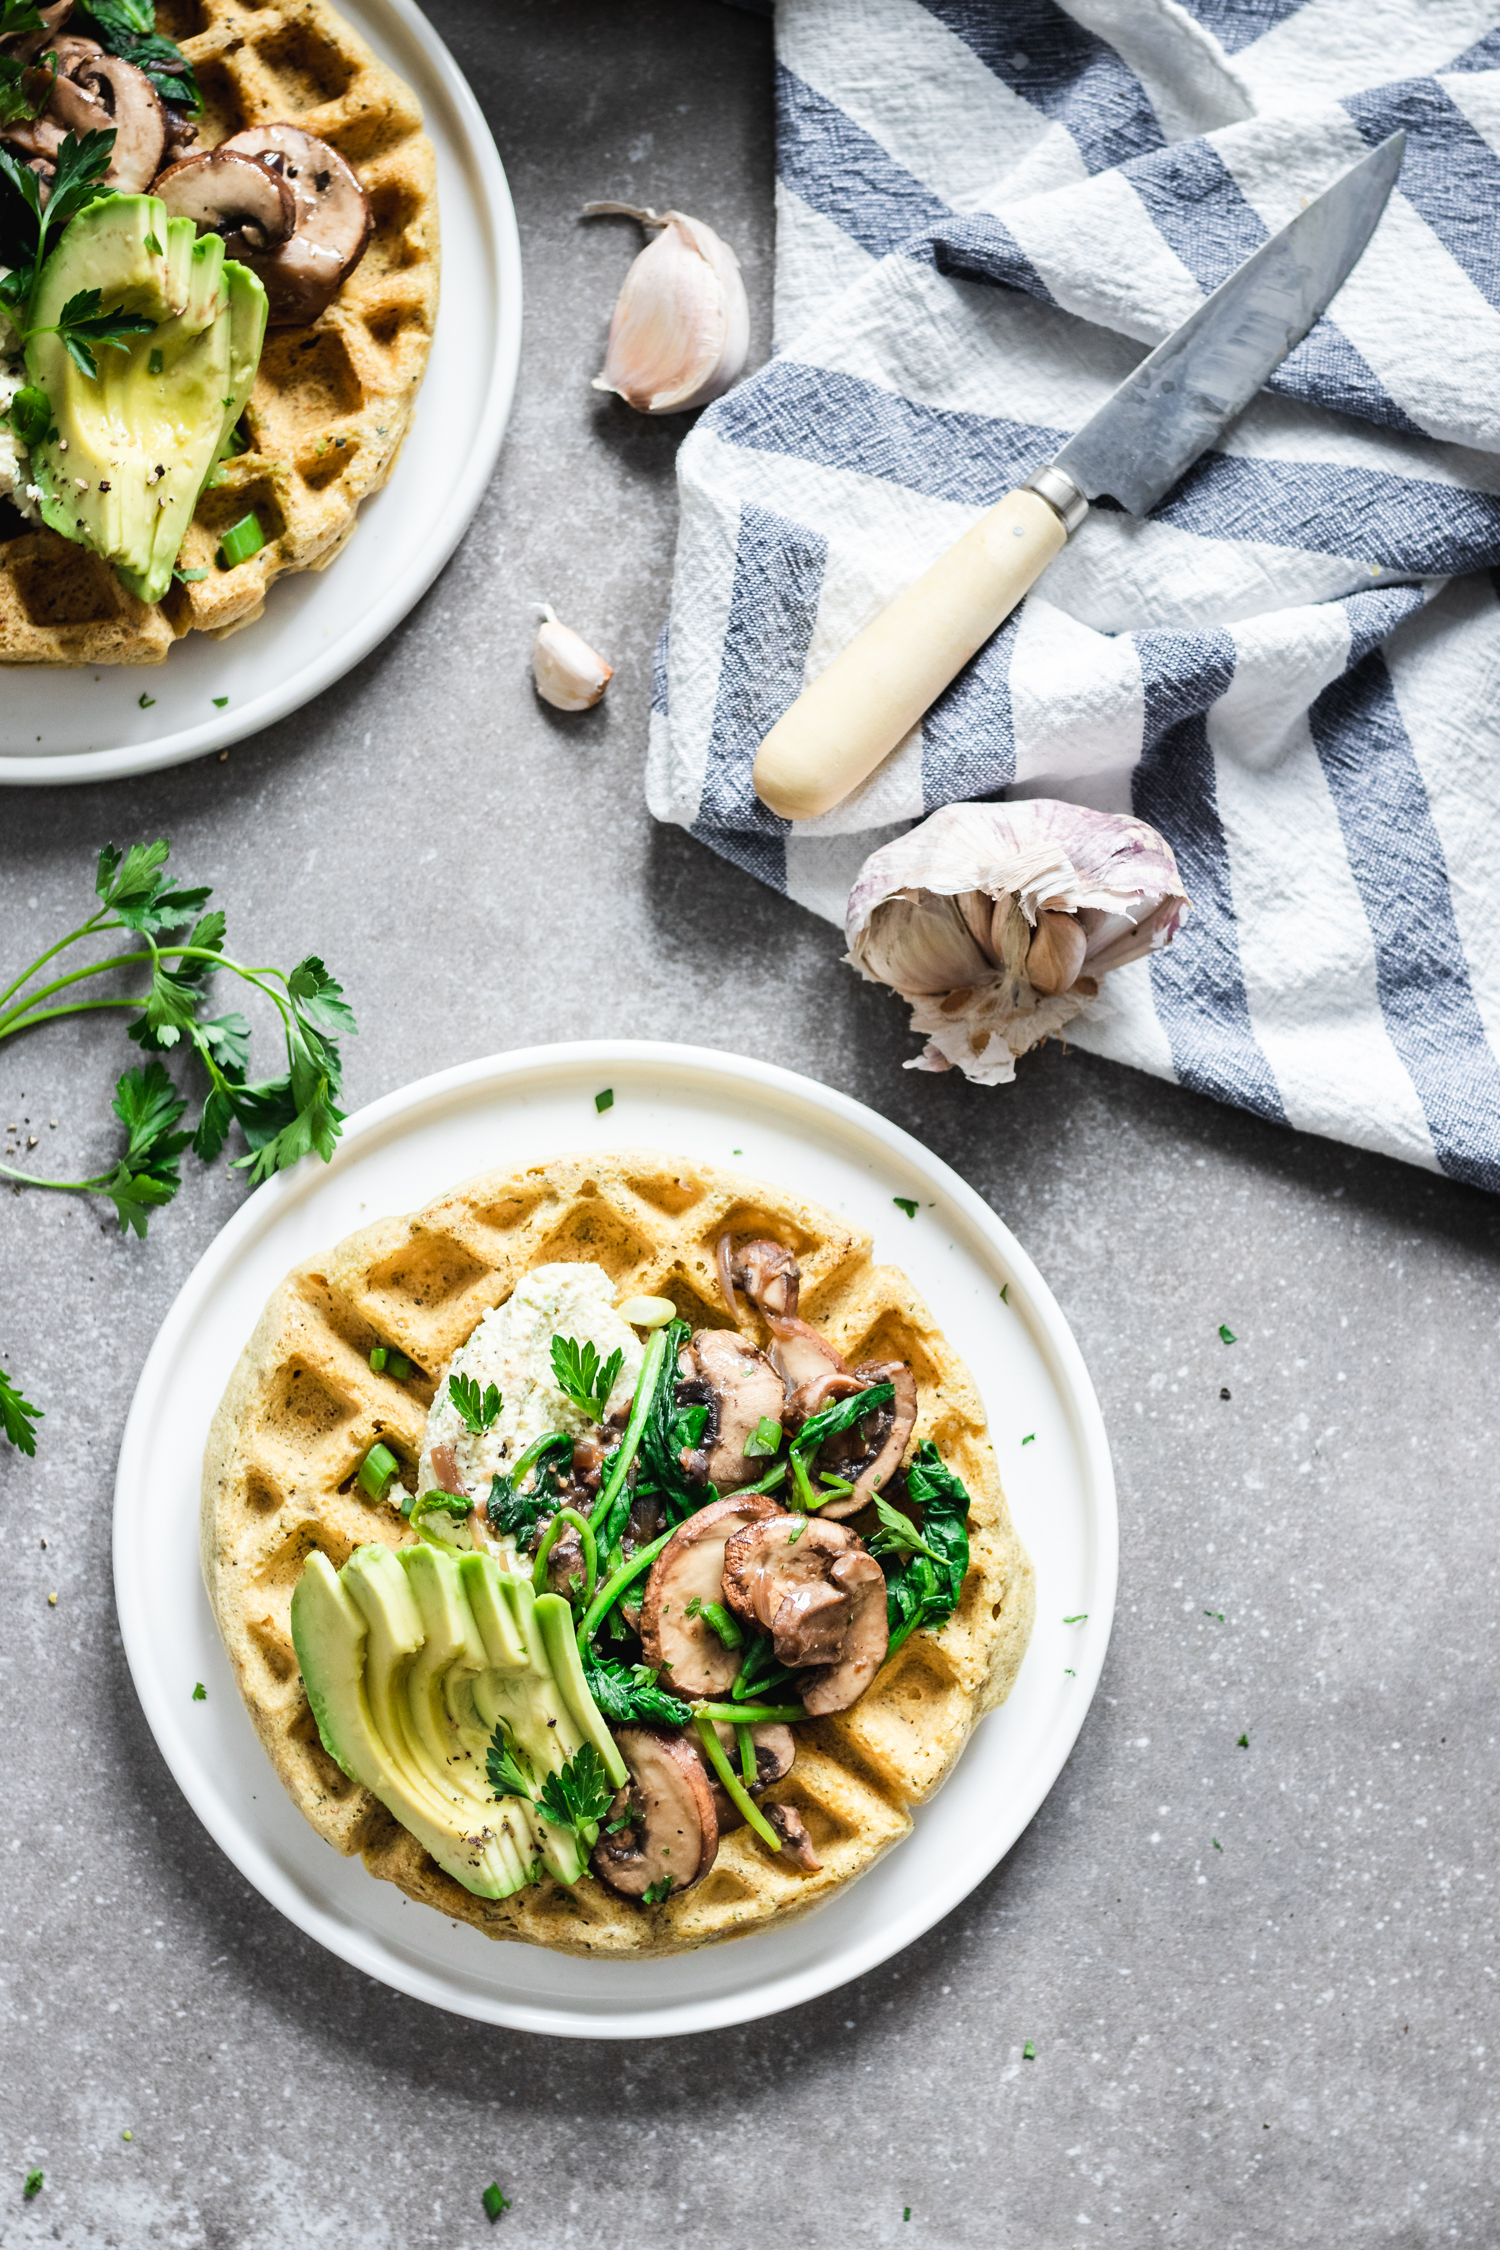 Corn Meal Waffles with Sautéed Cremini Mushrooms and Spinach